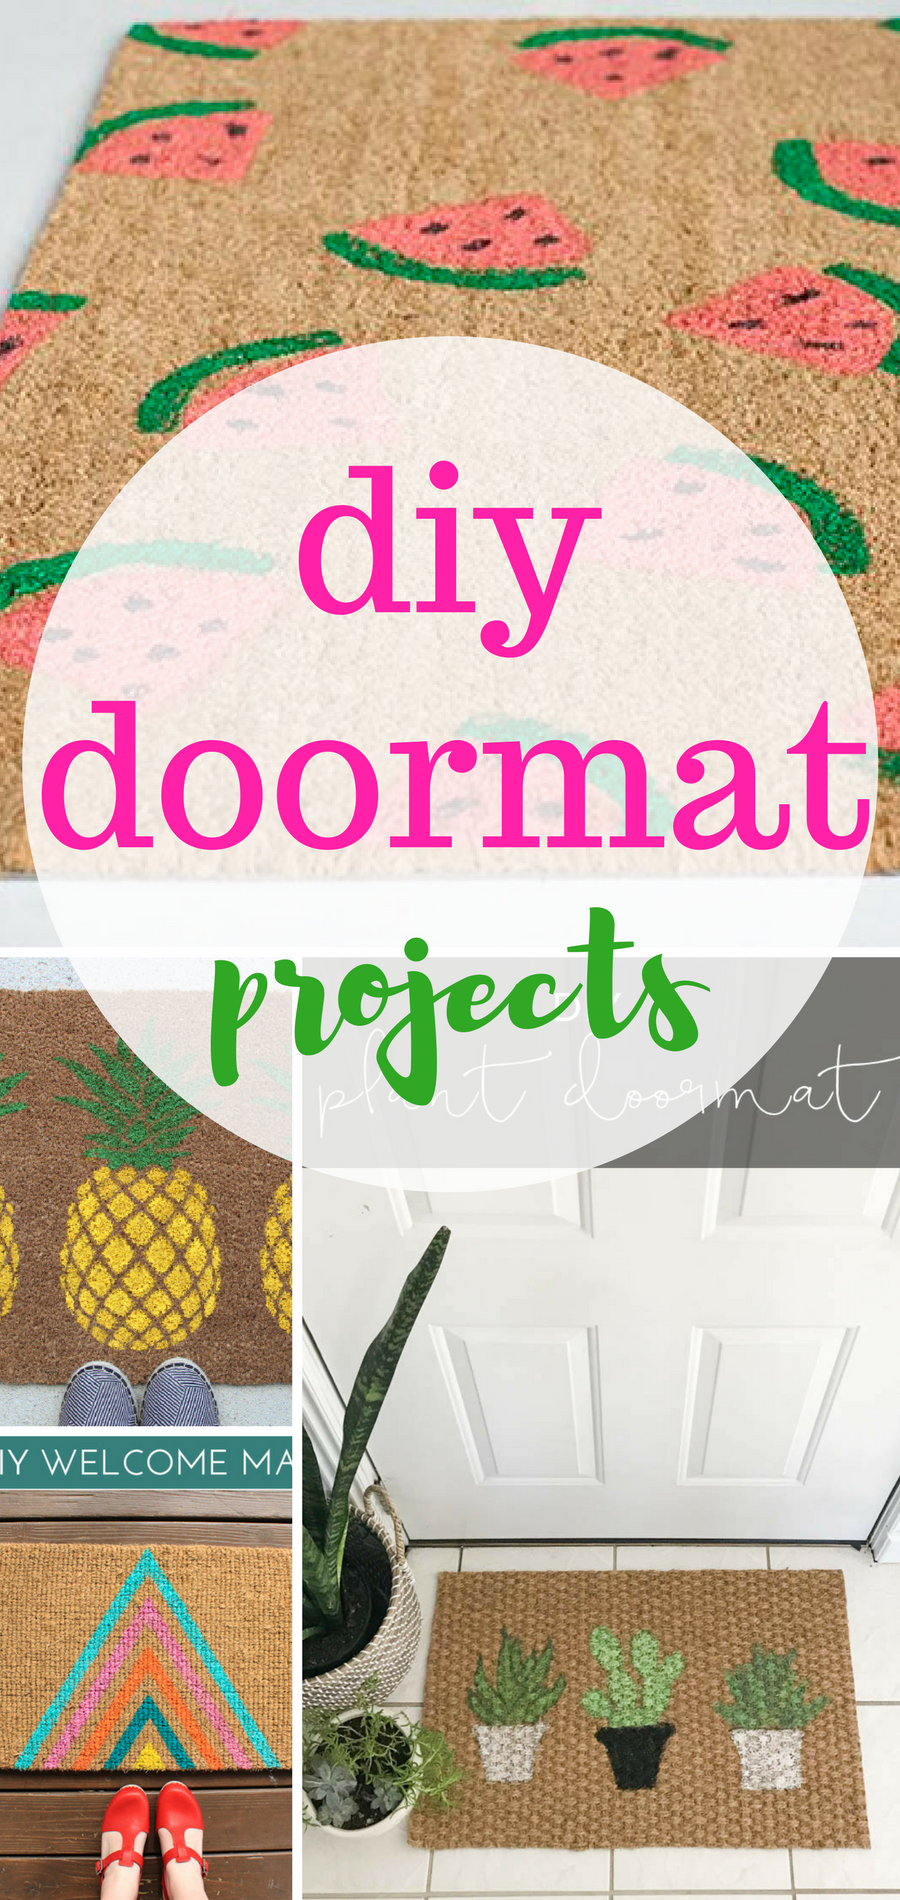 I’m dying for summer! Bring it on early with one of these bright doormat DIYs!   Summer, Projects, DIY, DIY doormat, doormat